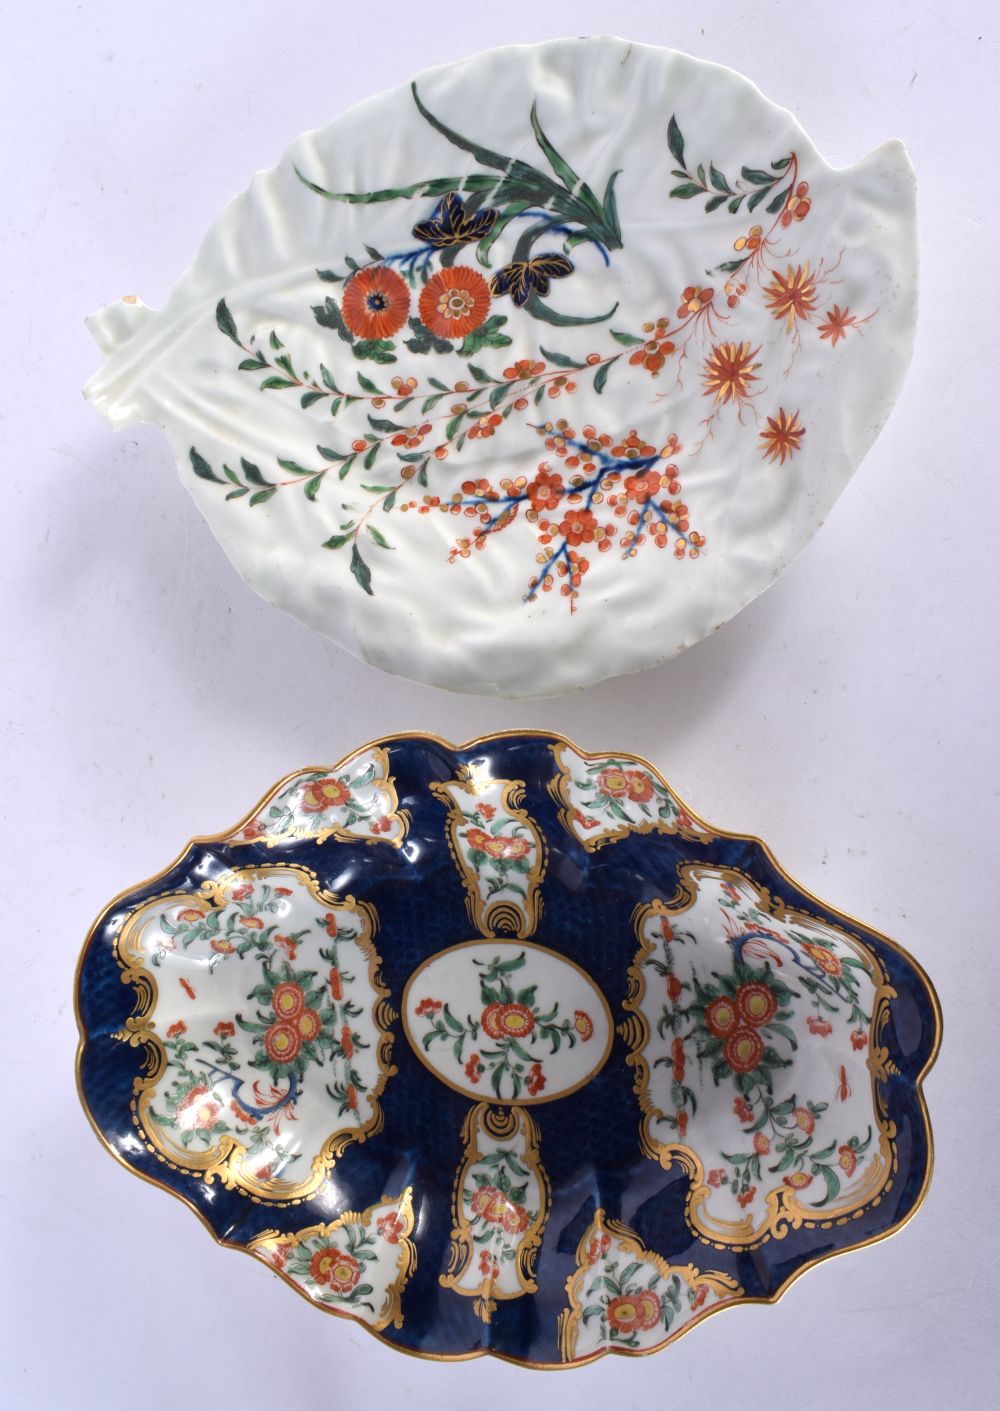 WORCESTER LOZENGE SHAPED DISH PAINTED WITH KAKIEMON FLOWERS IN MIRROR SHAPED CARTOUCHES ON A BLUE SC